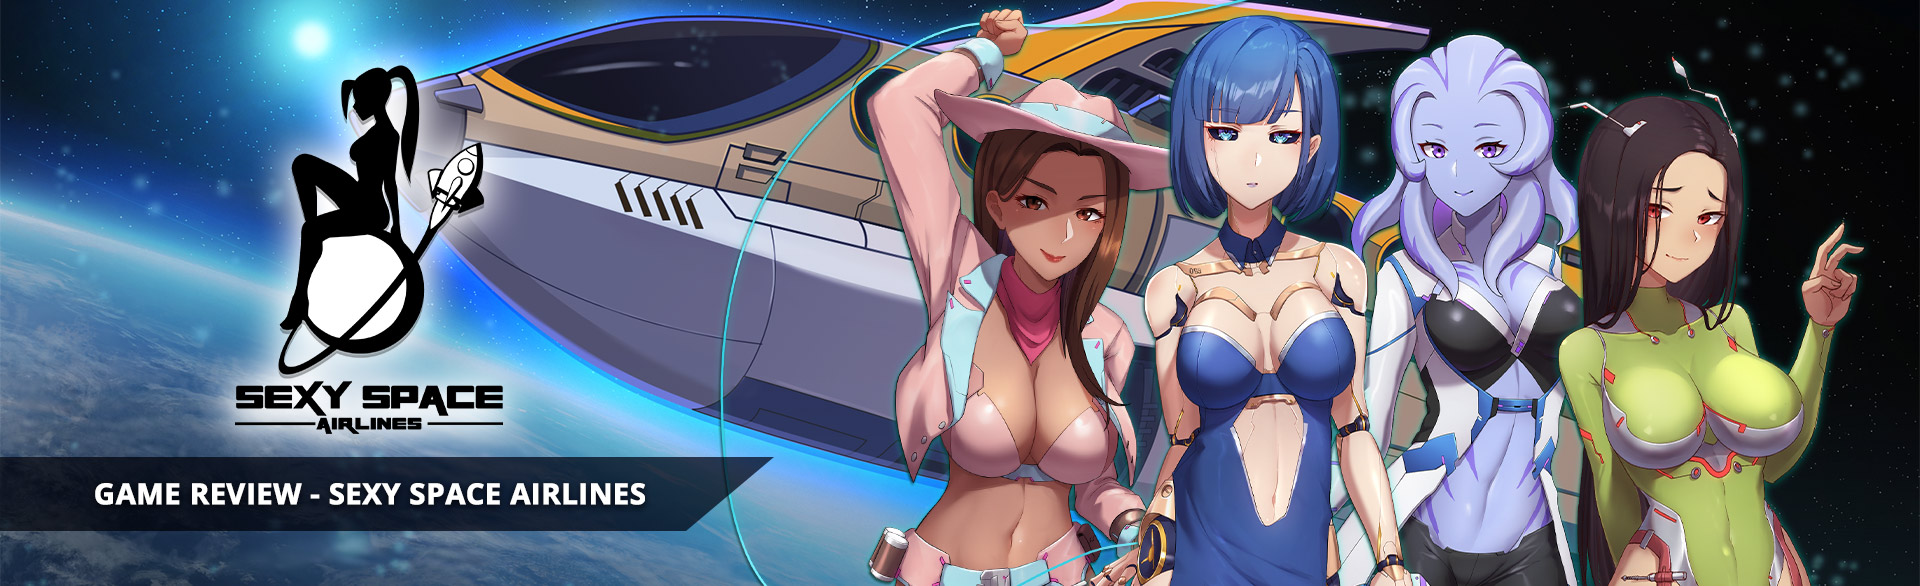 Casual Idle Dating Sim Sexy Space Airlines